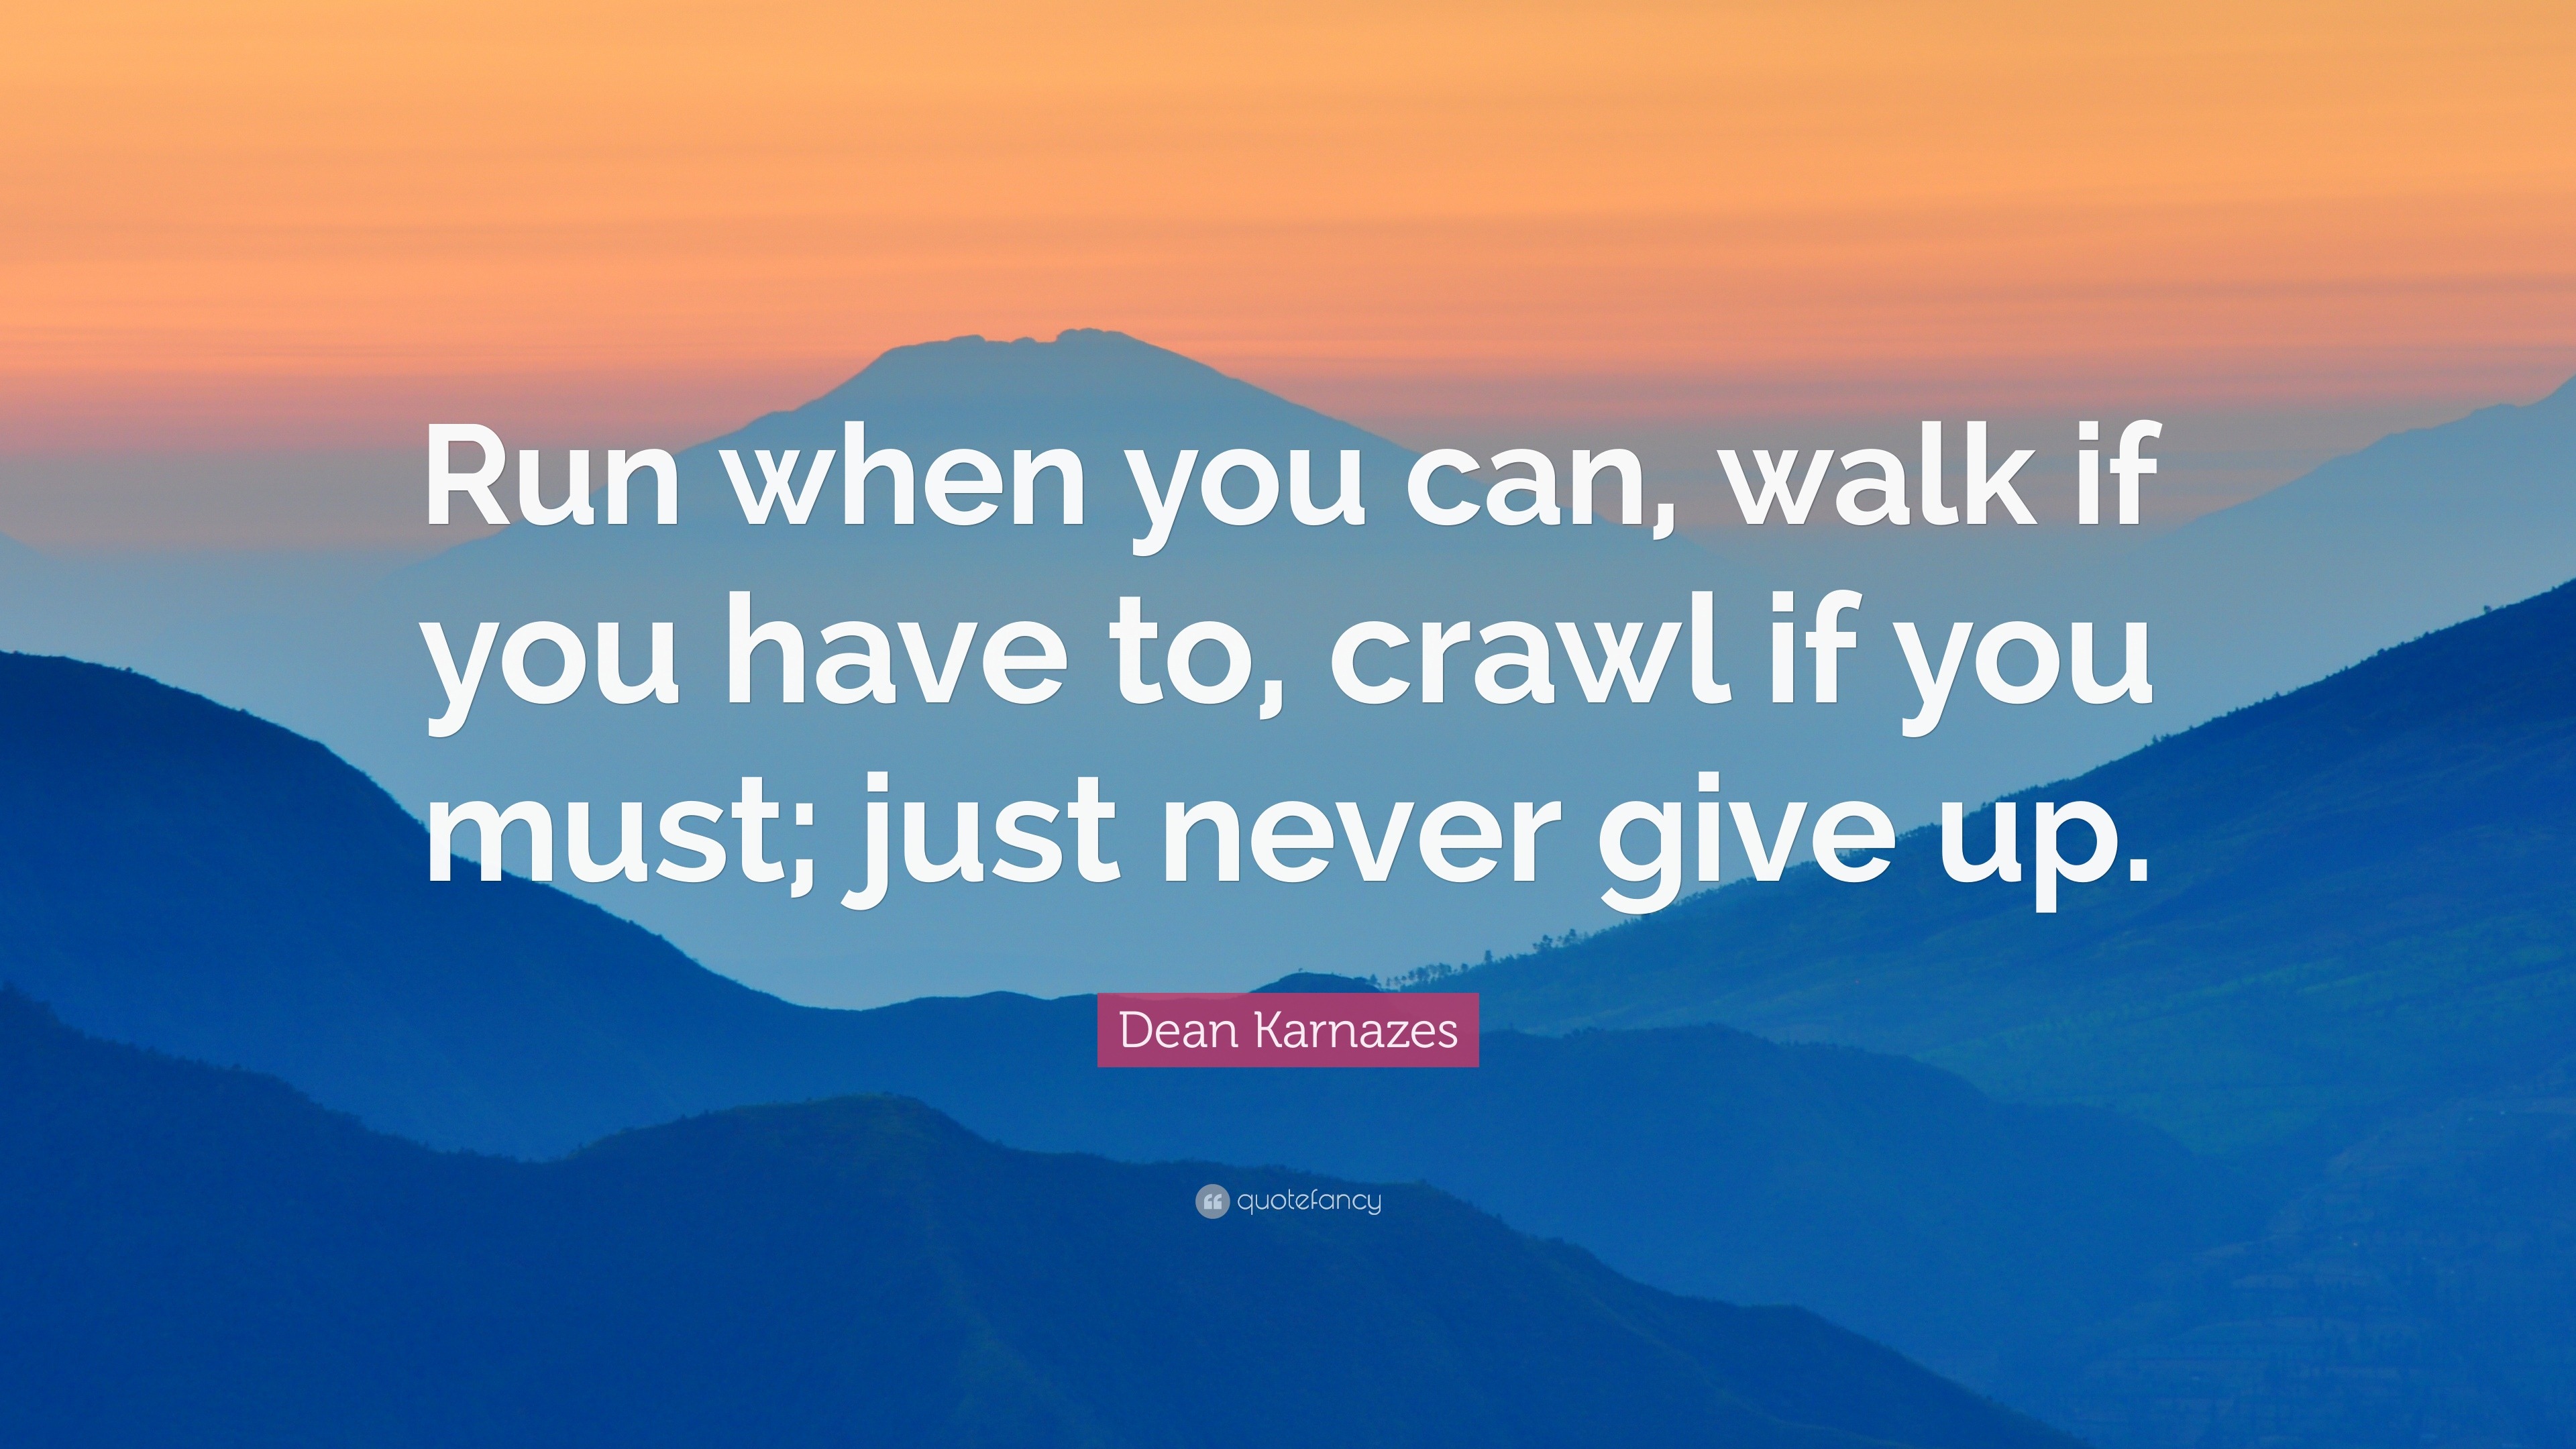 17465-Dean-Karnazes-Quote-Run-when-you-can-walk-if-you-have-to-crawl-if.jpg